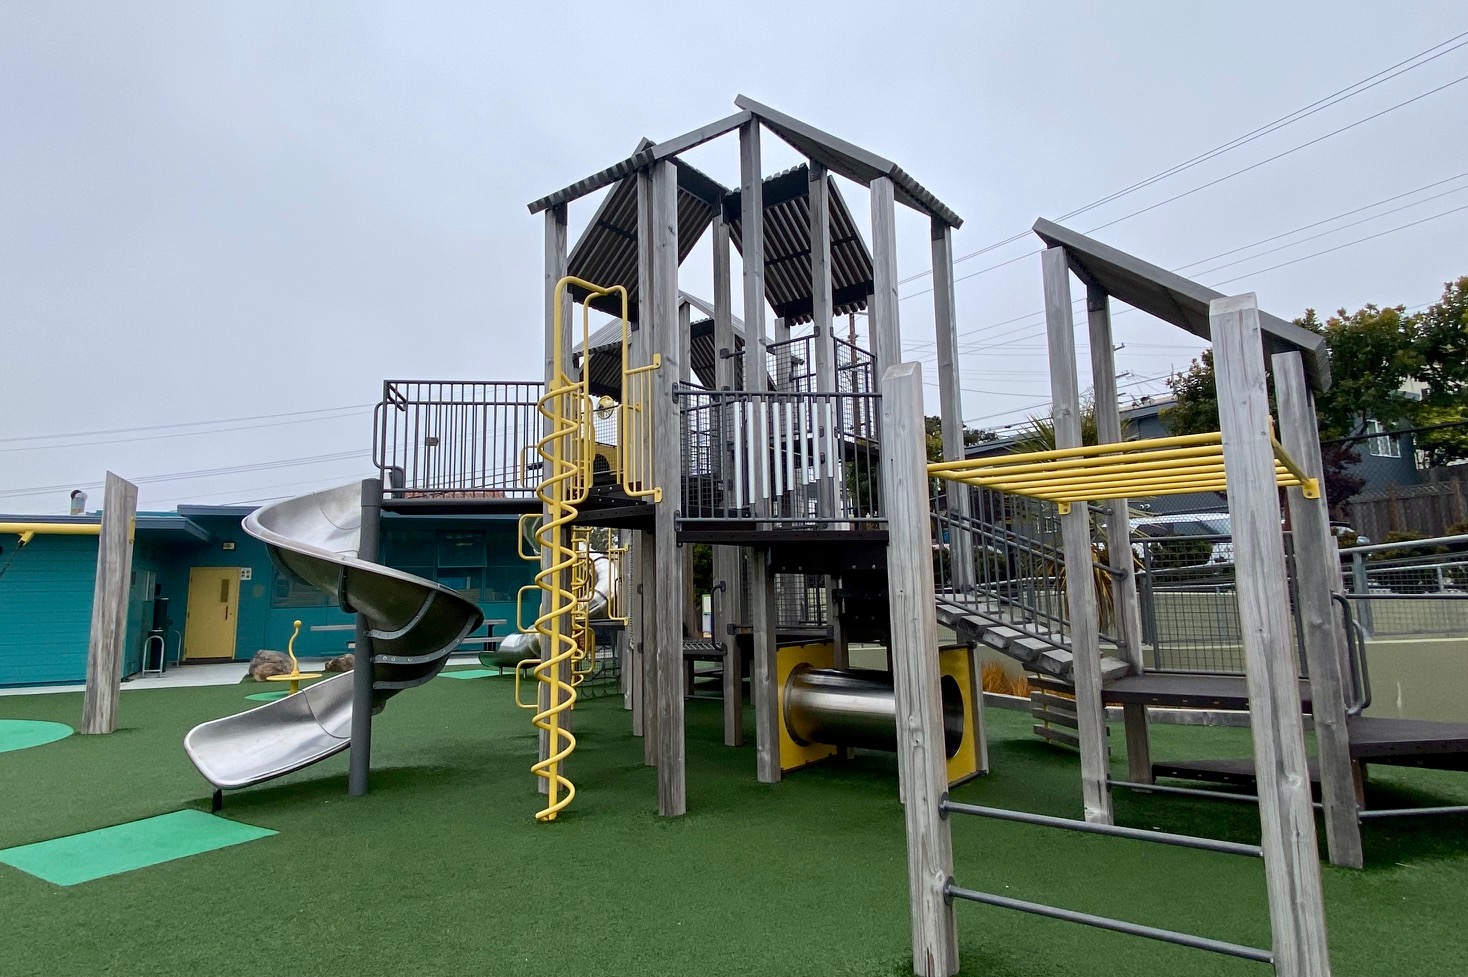 A play structure with astroturf.